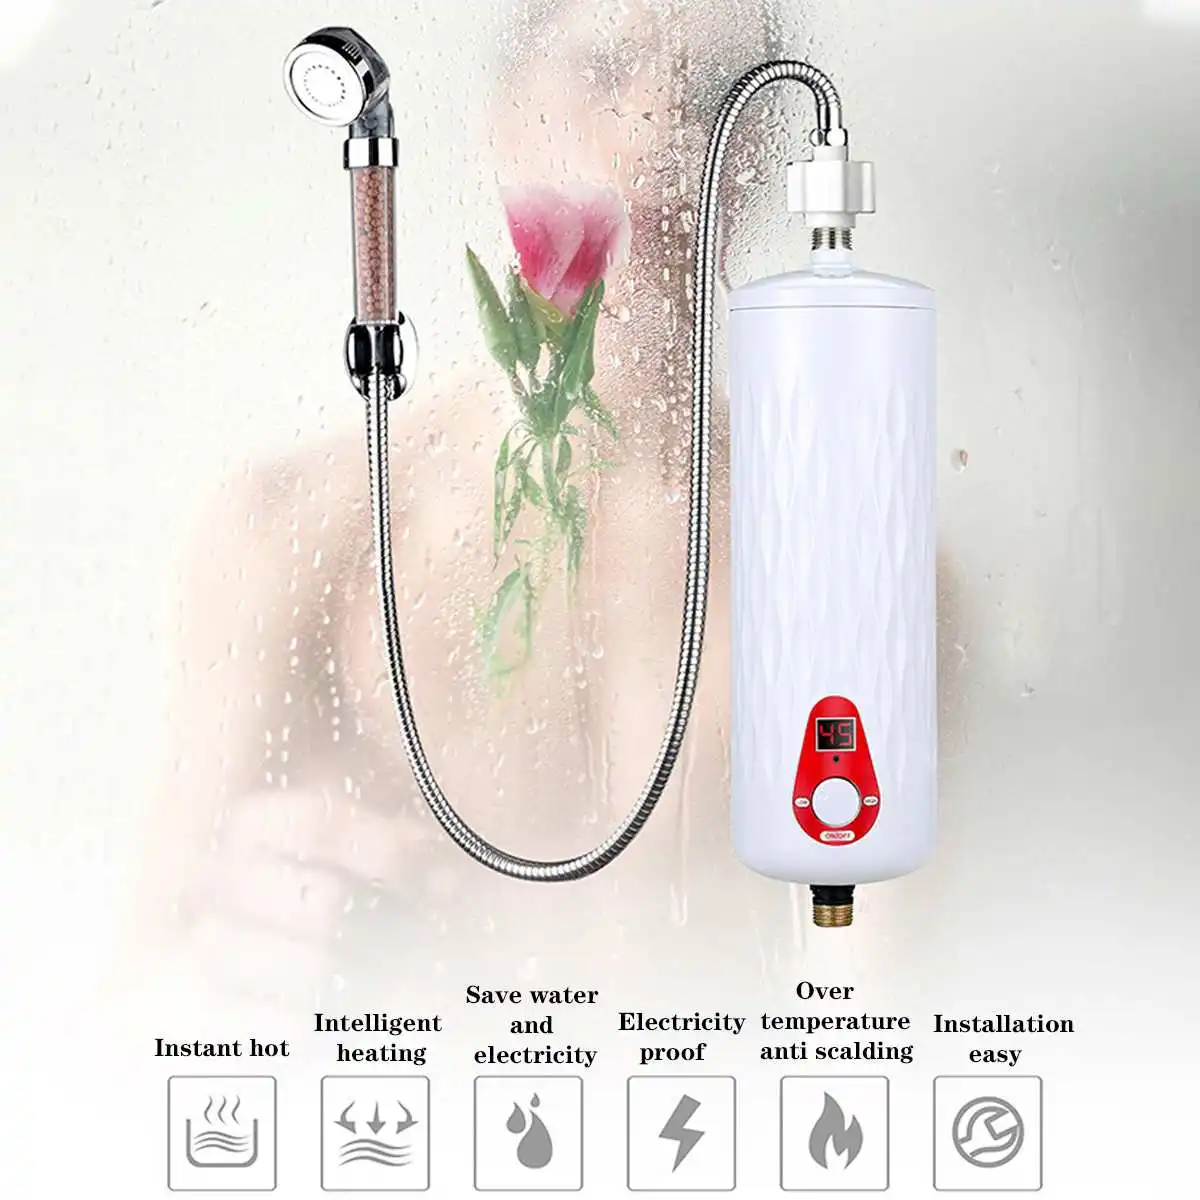 3 Modes Fast Heating 5500W Instant Electric Tankless Water Heater Instantaneous Kitchen Bathroom Shower Hot Water Flow System